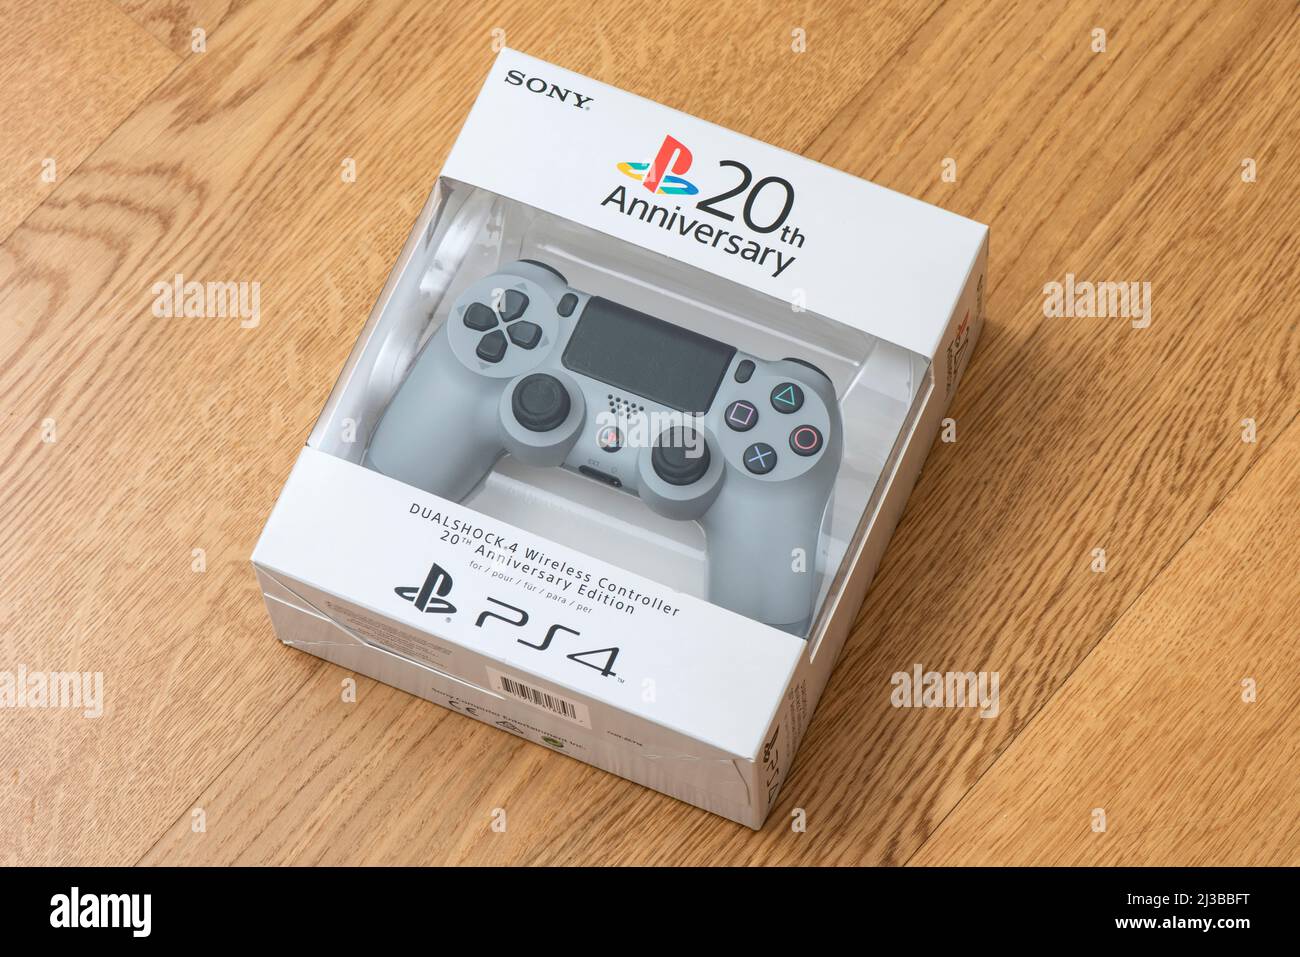 Sony Playstation 4 High Resolution Stock Photography and Images - Alamy